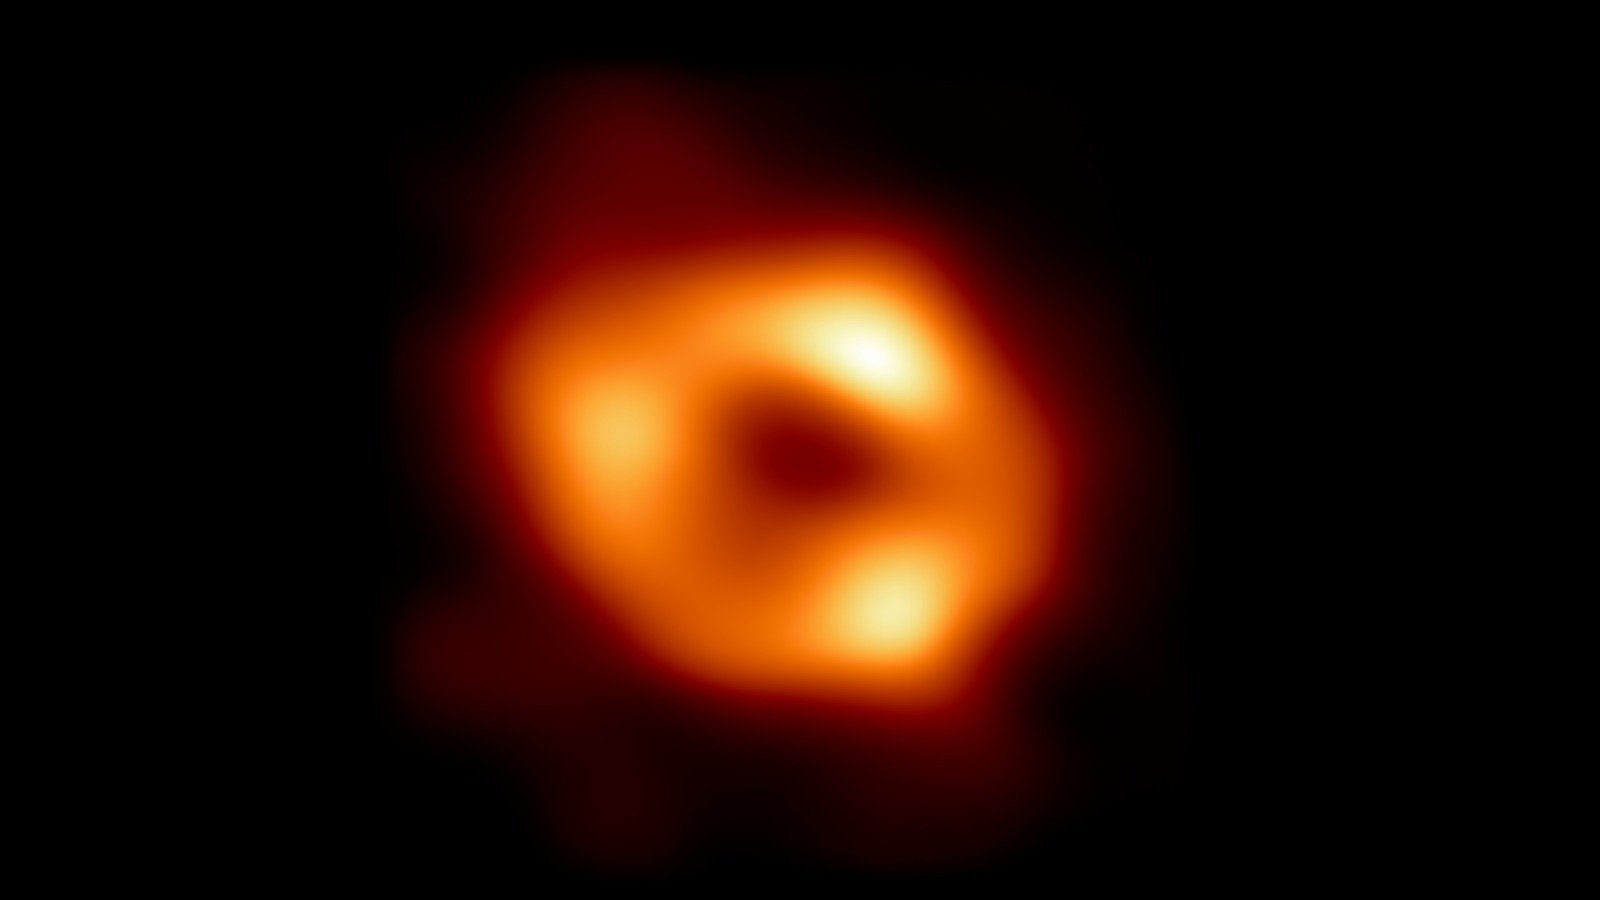 Event Horizon Telescope Captures First Image Of The Milky Way's Supermassive Black Hole